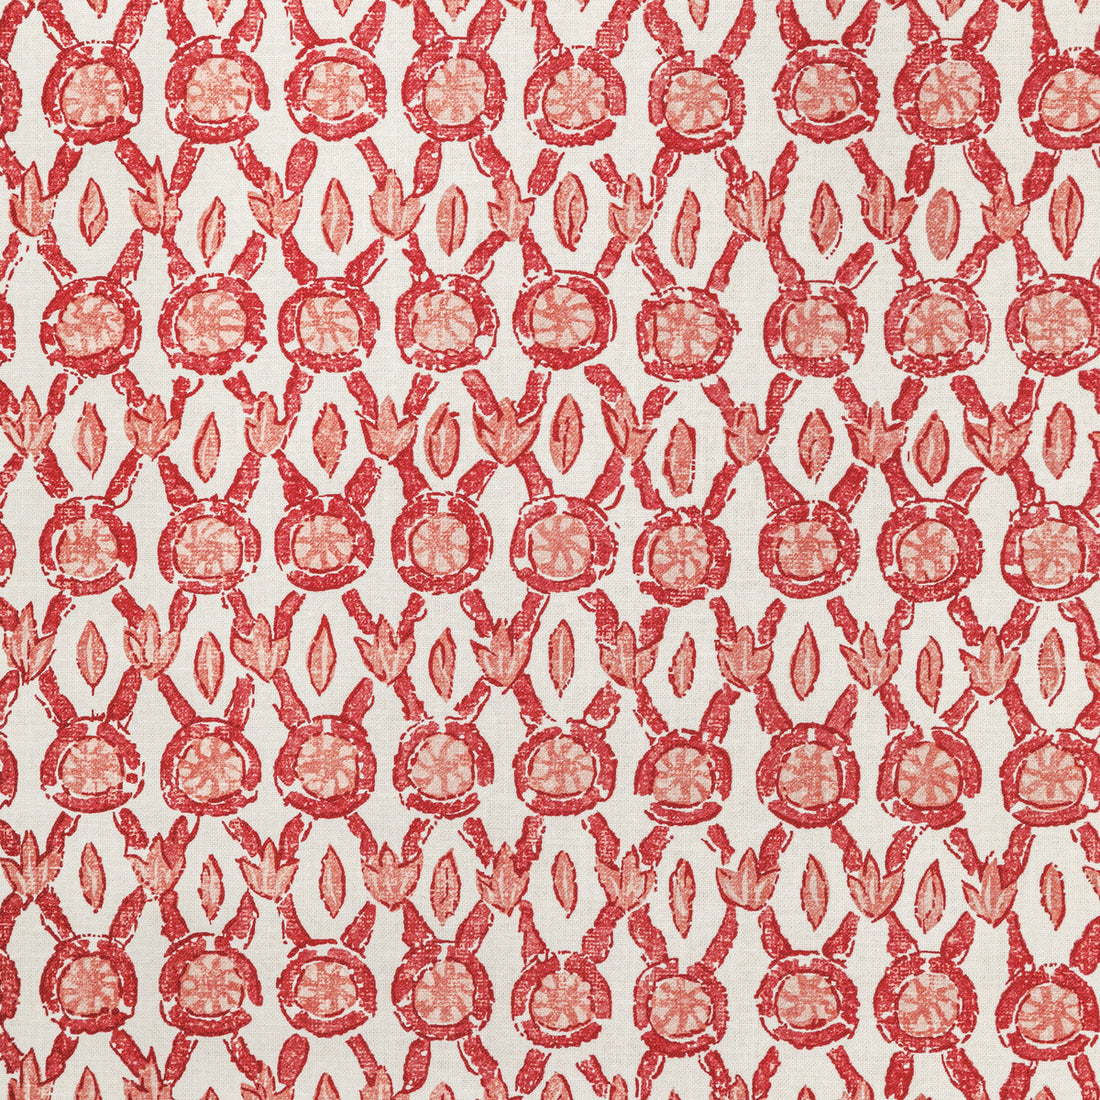 Galon Print fabric in coral color - pattern 8022103.124.0 - by Brunschwig &amp; Fils in the Manoir collection